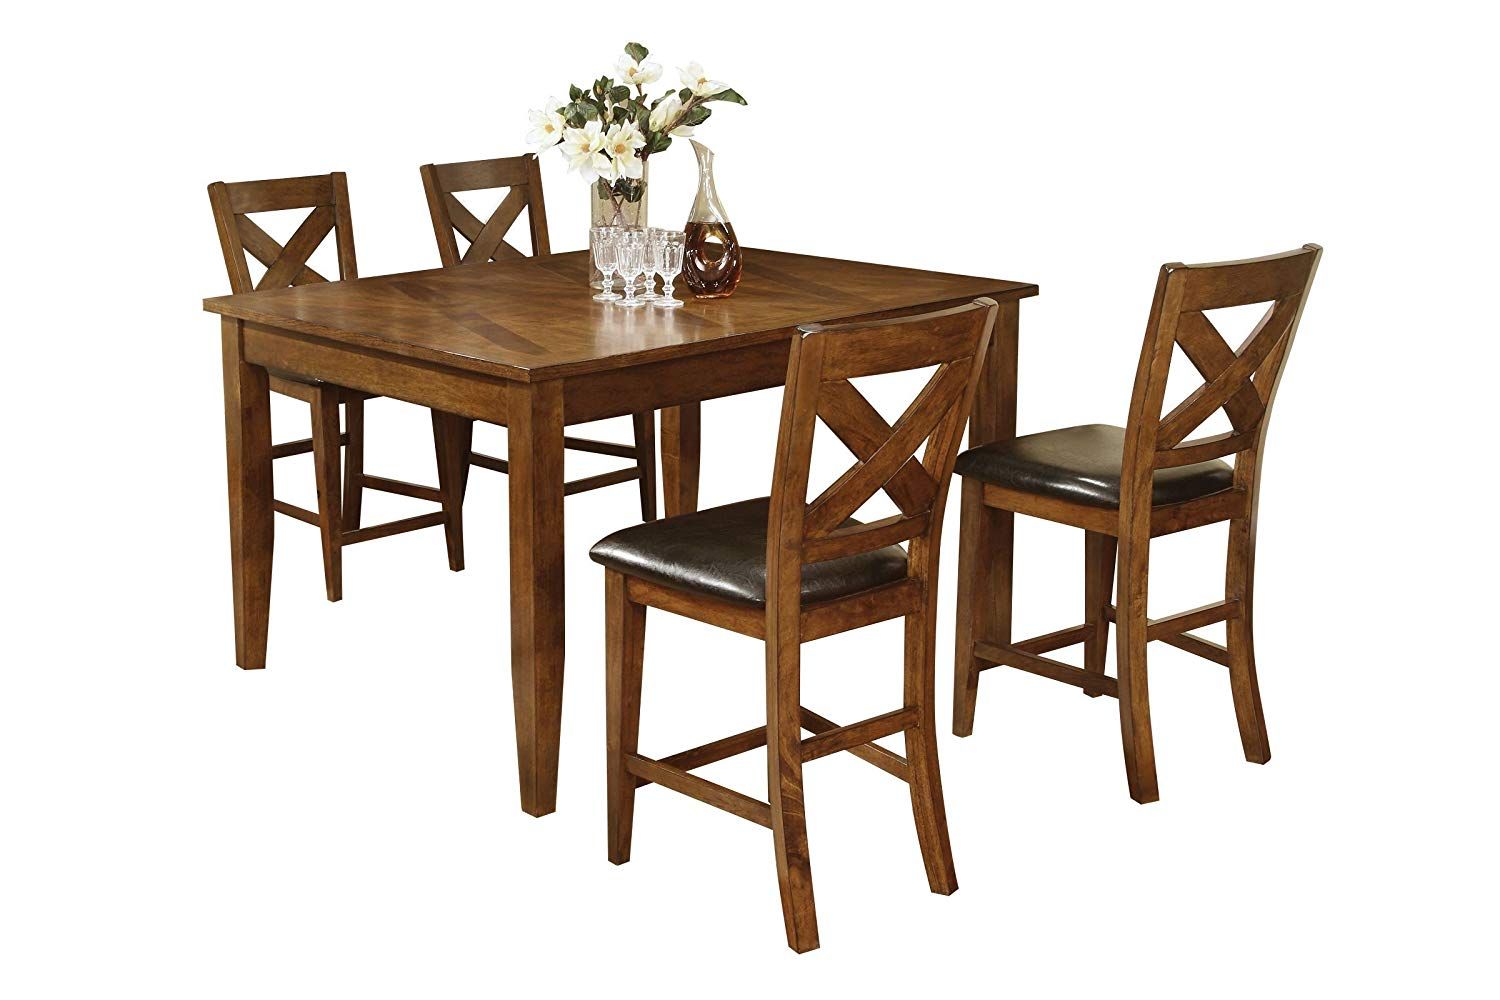 Kaya 3 Piece Dining Sets Intended For Current Cheap Pub Table White, Find Pub Table White Deals On Line At Alibaba (Photo 17 of 20)